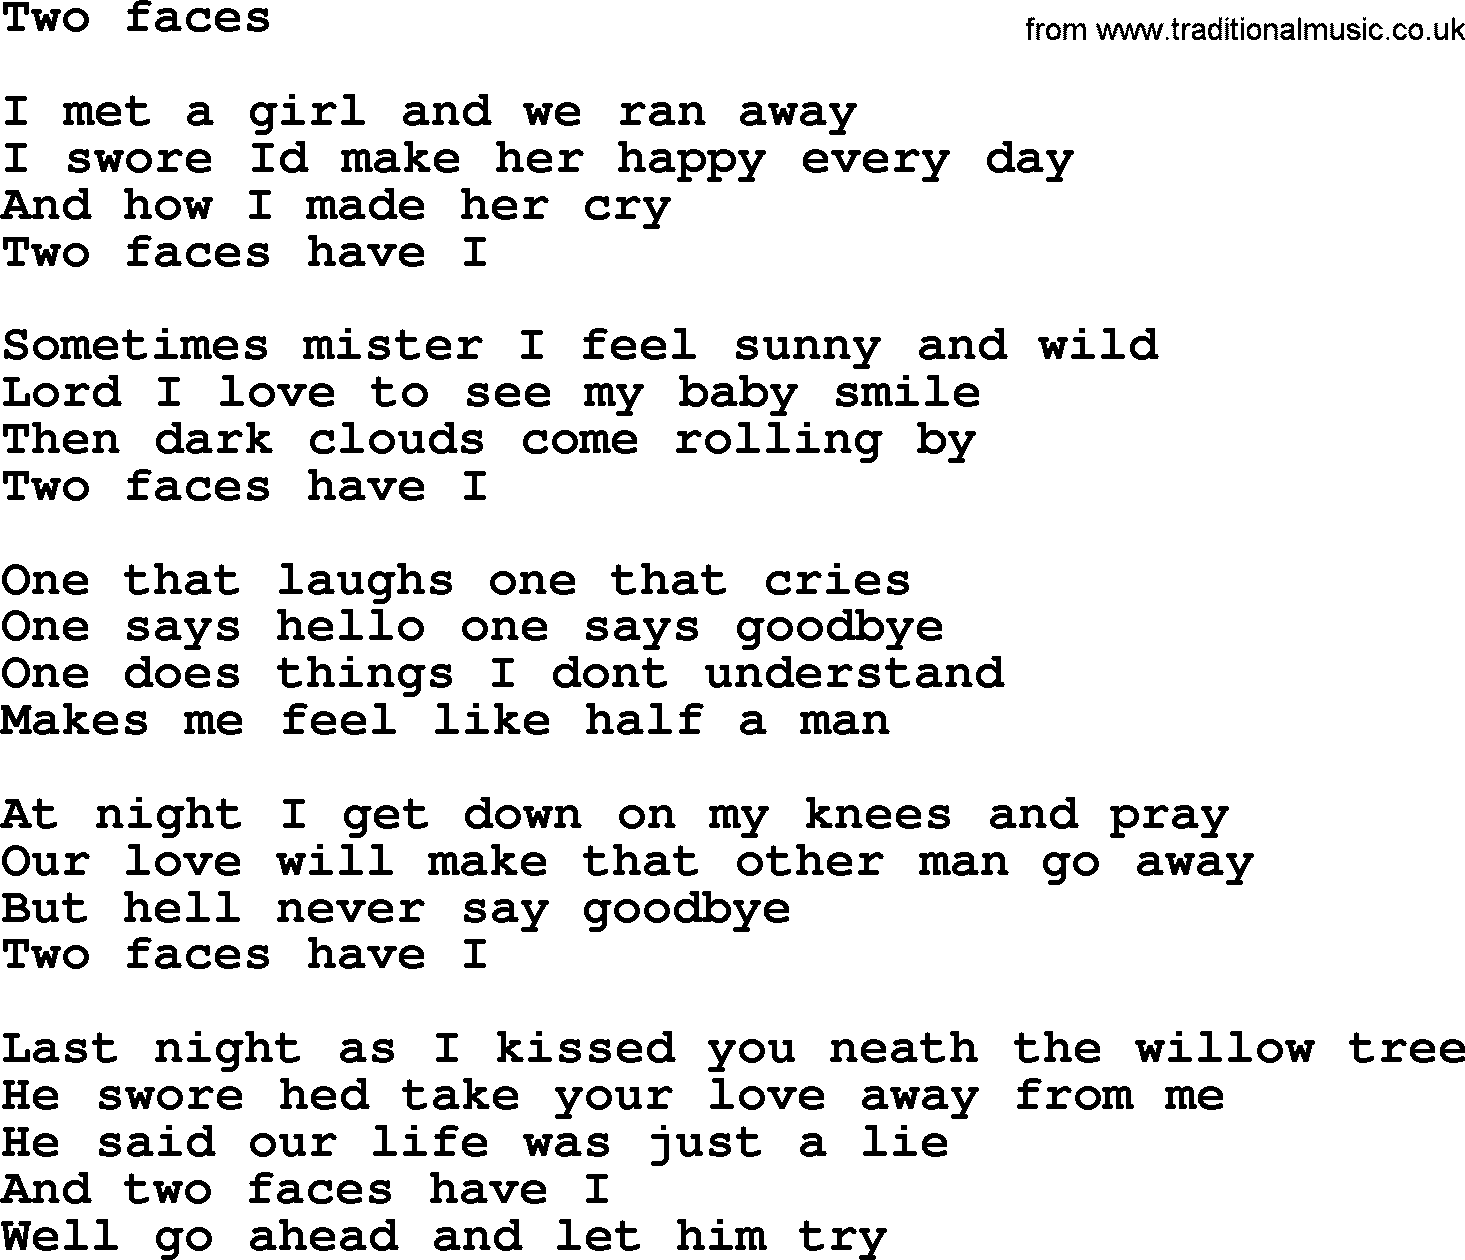 Bruce Springsteen song: Two Faces lyrics